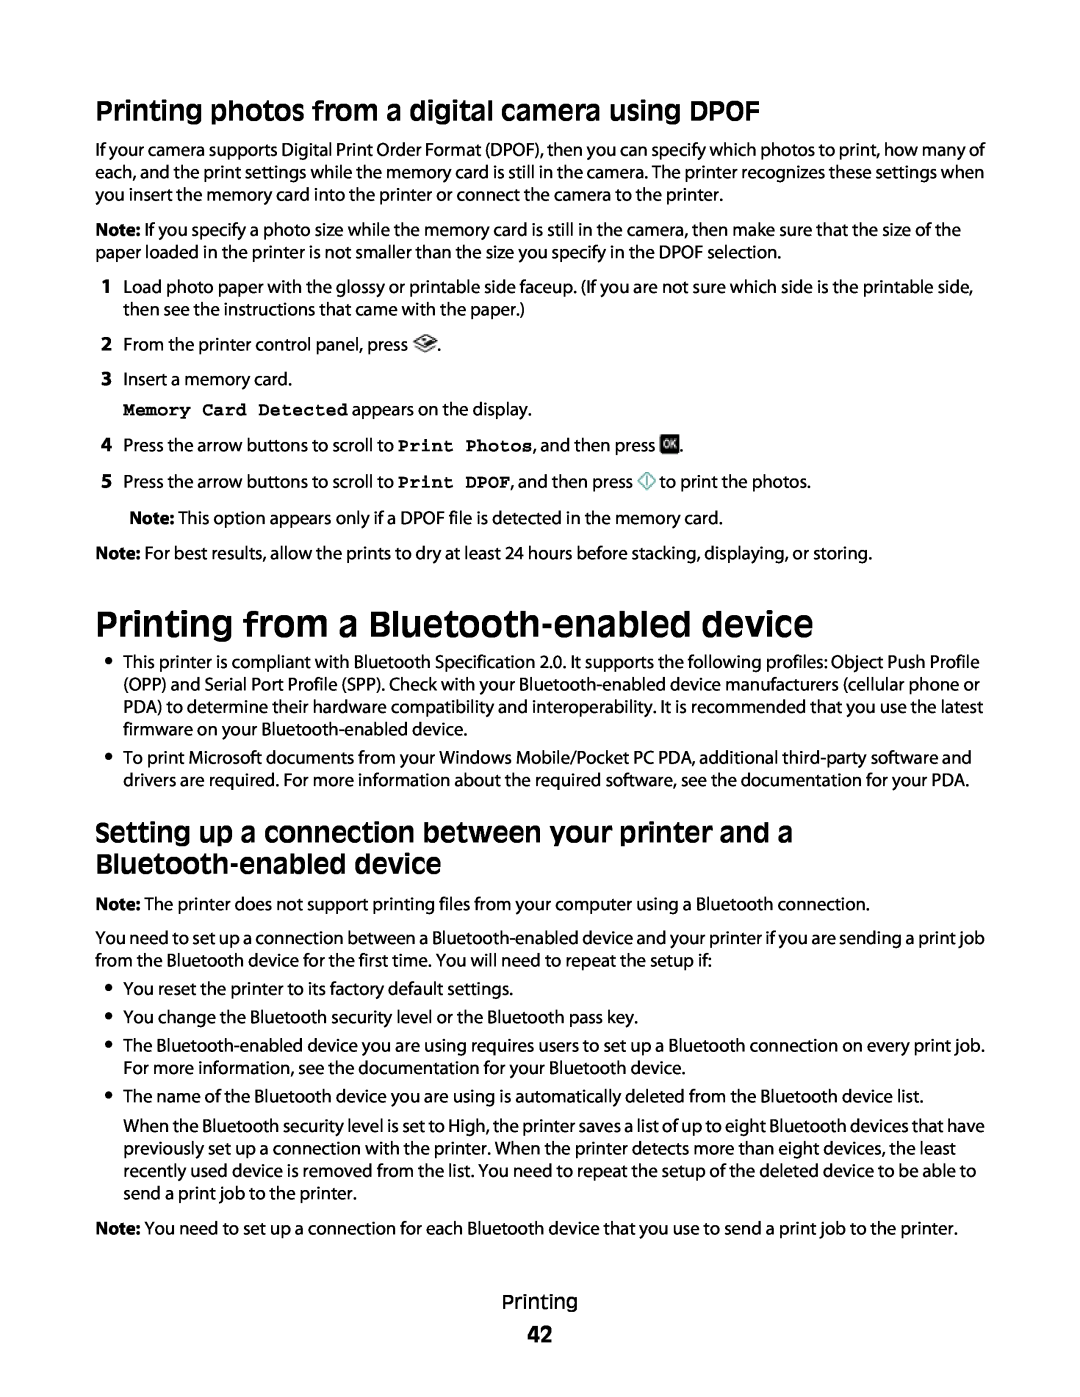 Lexmark 101, 10E manual Printing from a Bluetooth-enableddevice, Printing photos from a digital camera using DPOF 